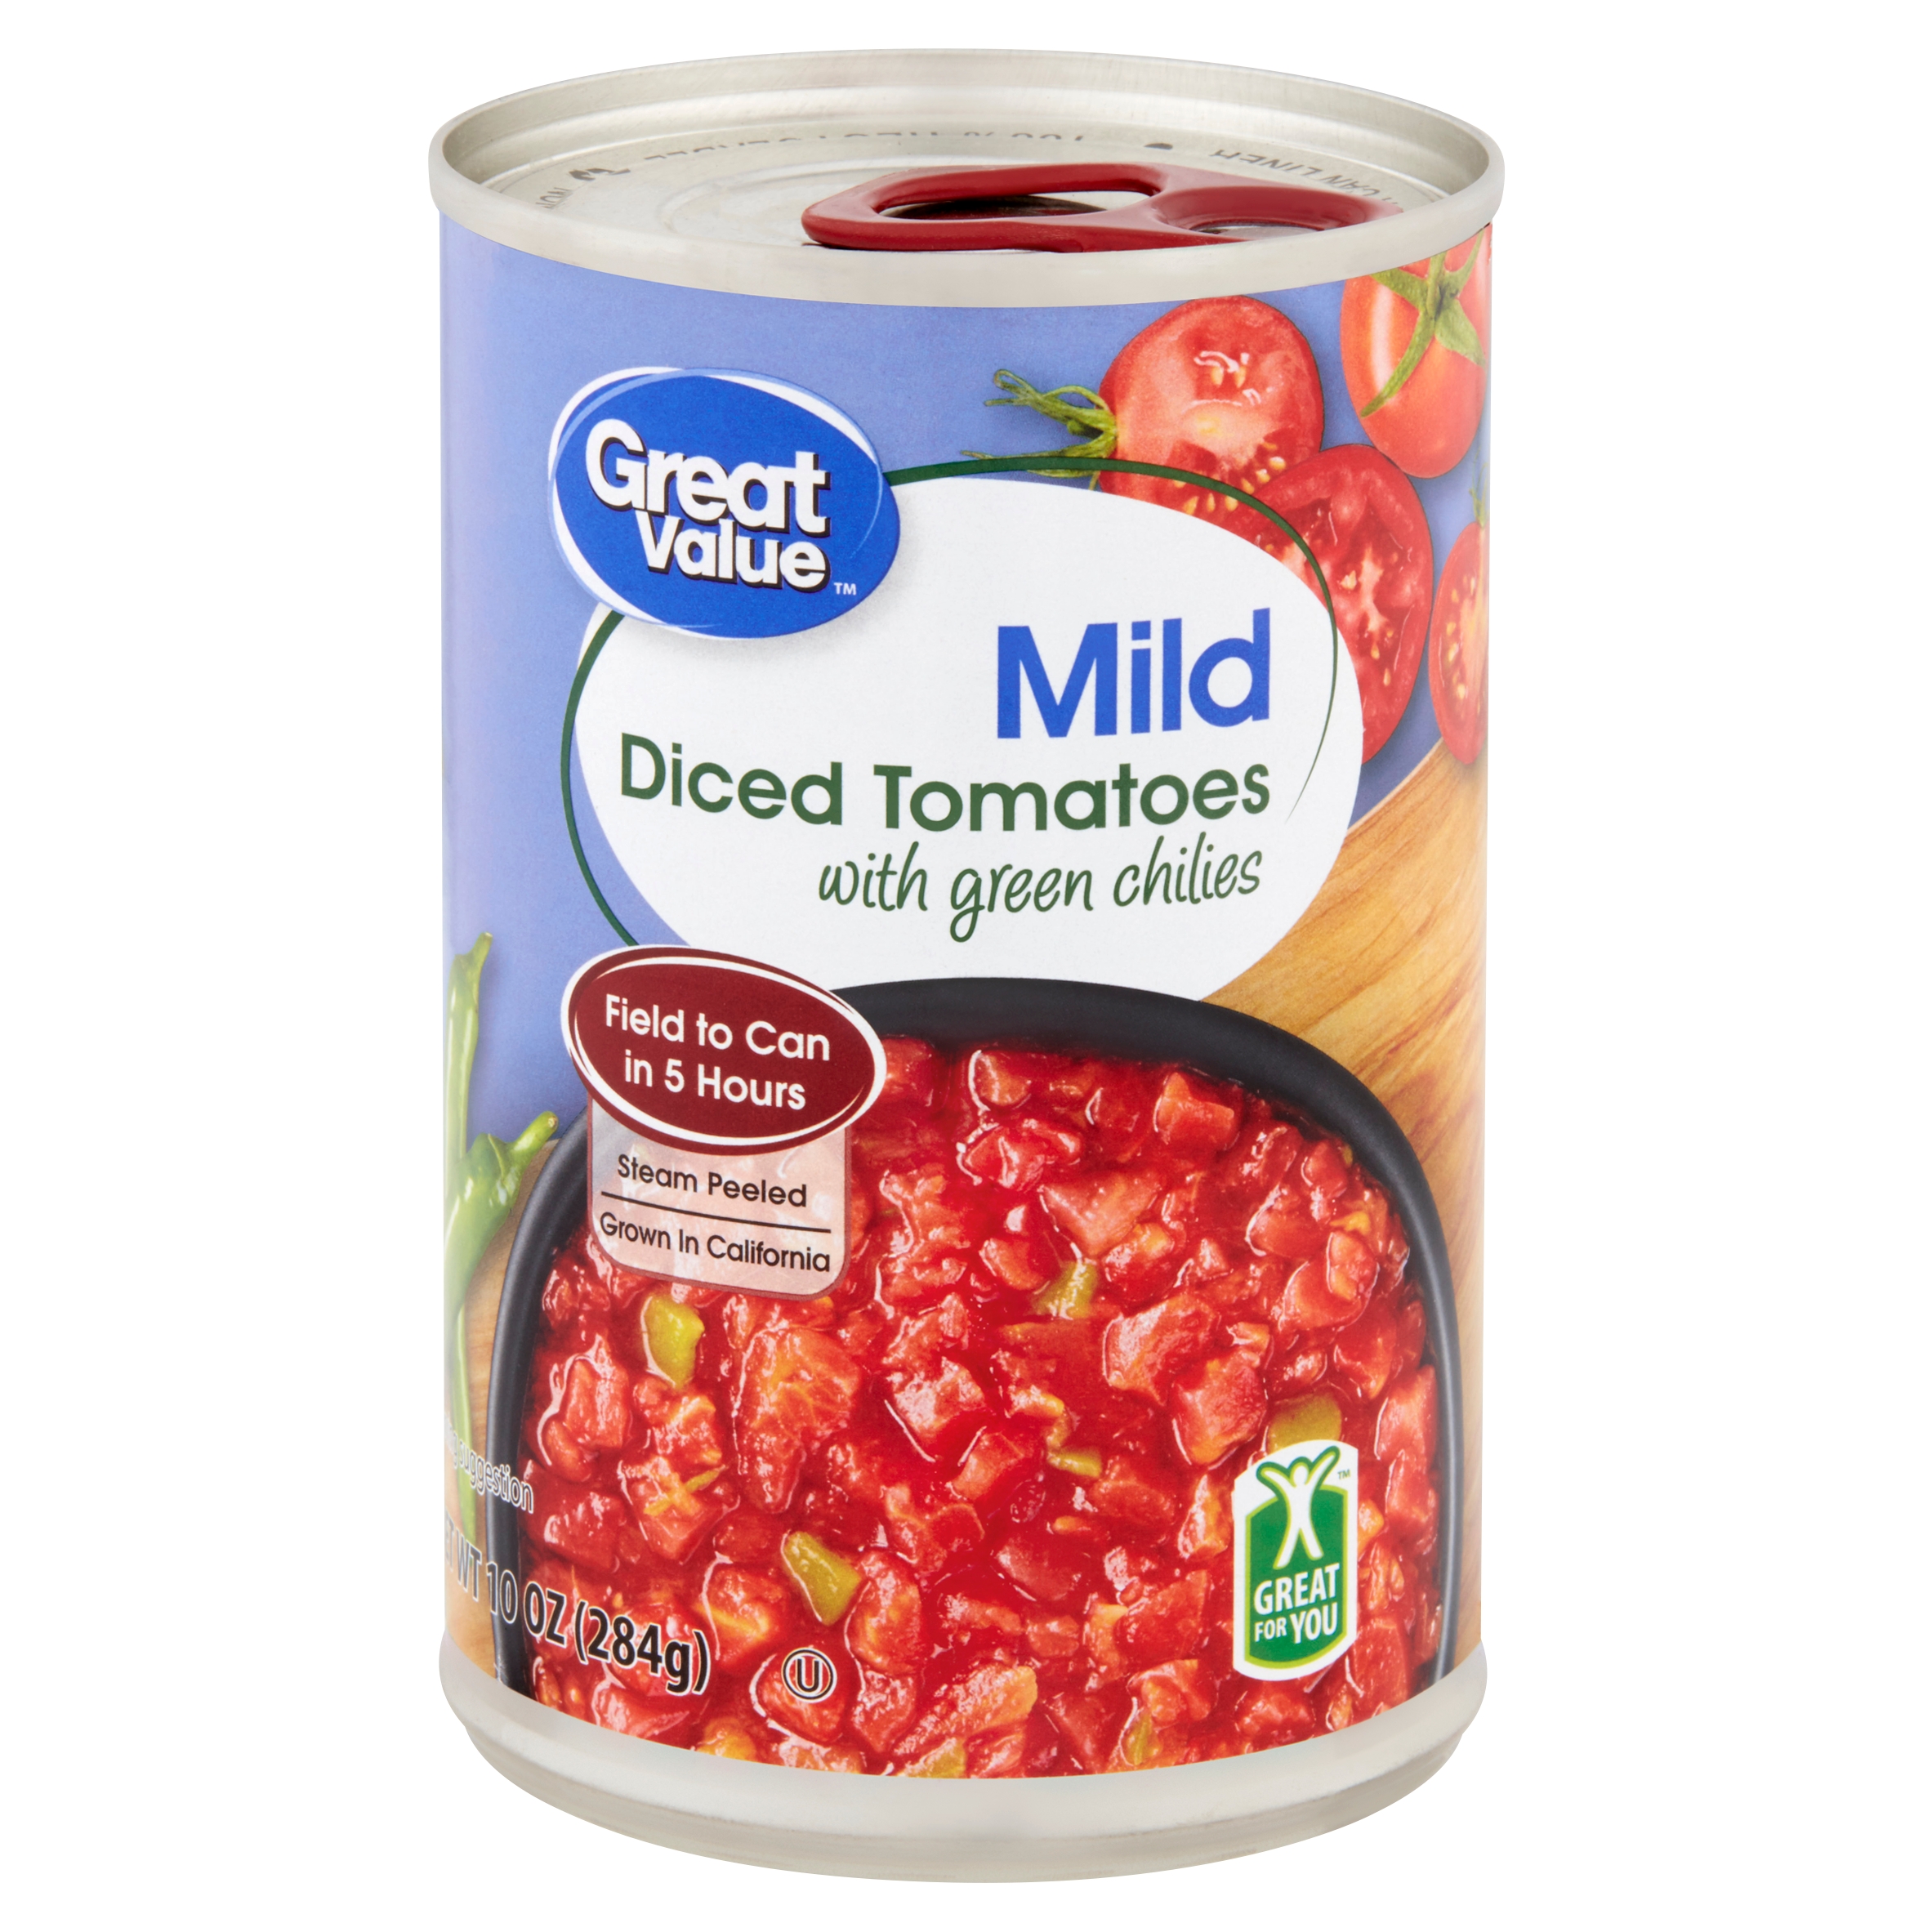 Great Value Mild Diced Tomatoes with Green Chilies, 10 Oz